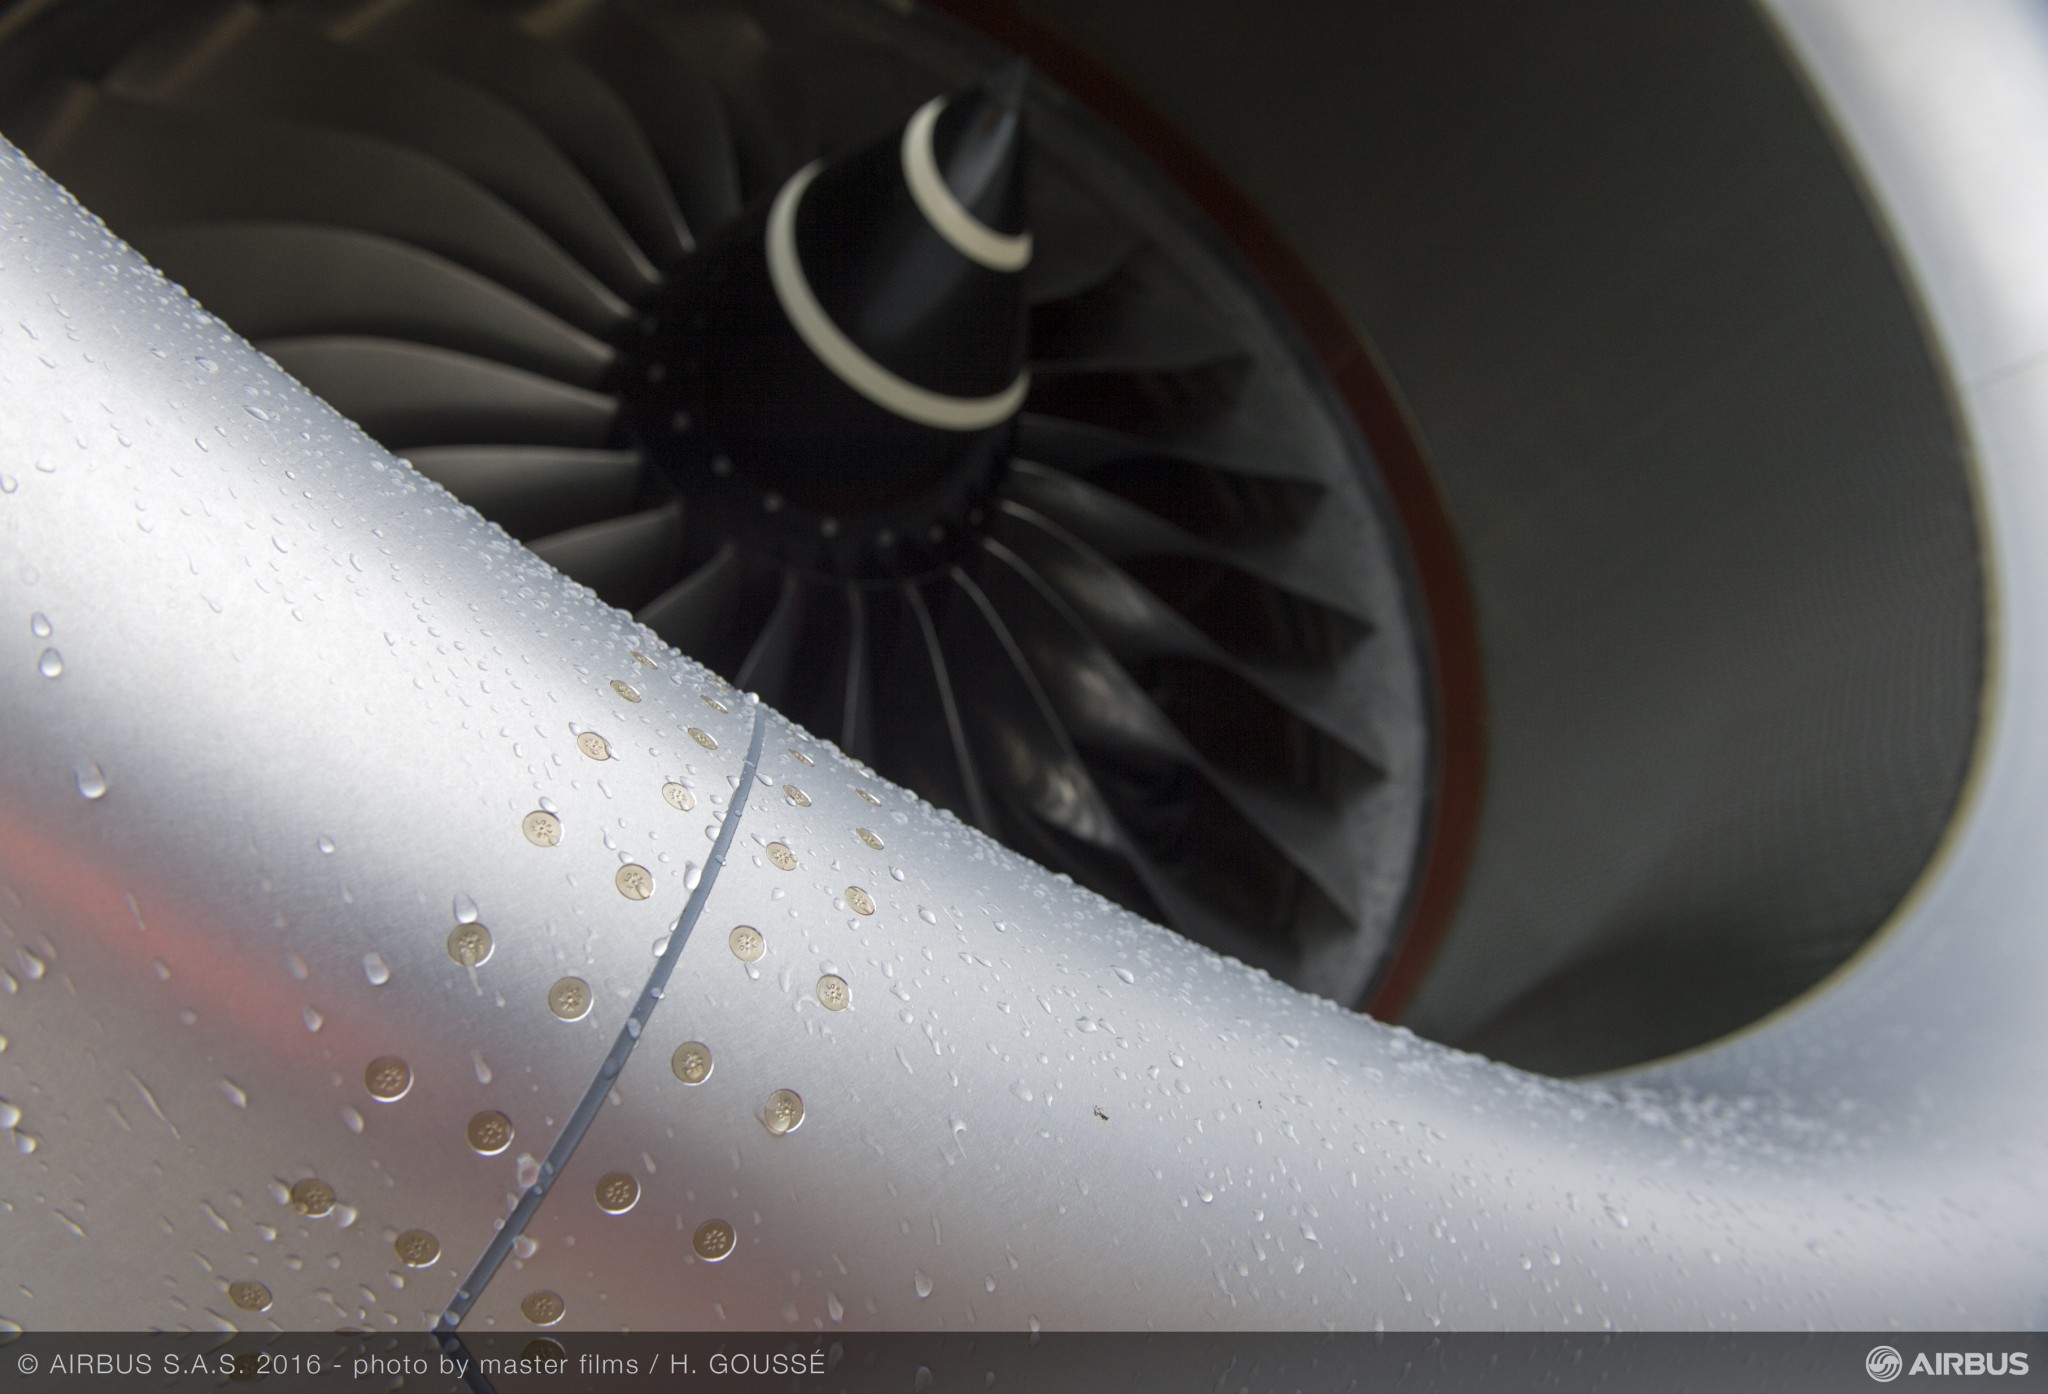 AFI KLM E&M joins Rolls-Royce CareNetwork with maintenance agreement